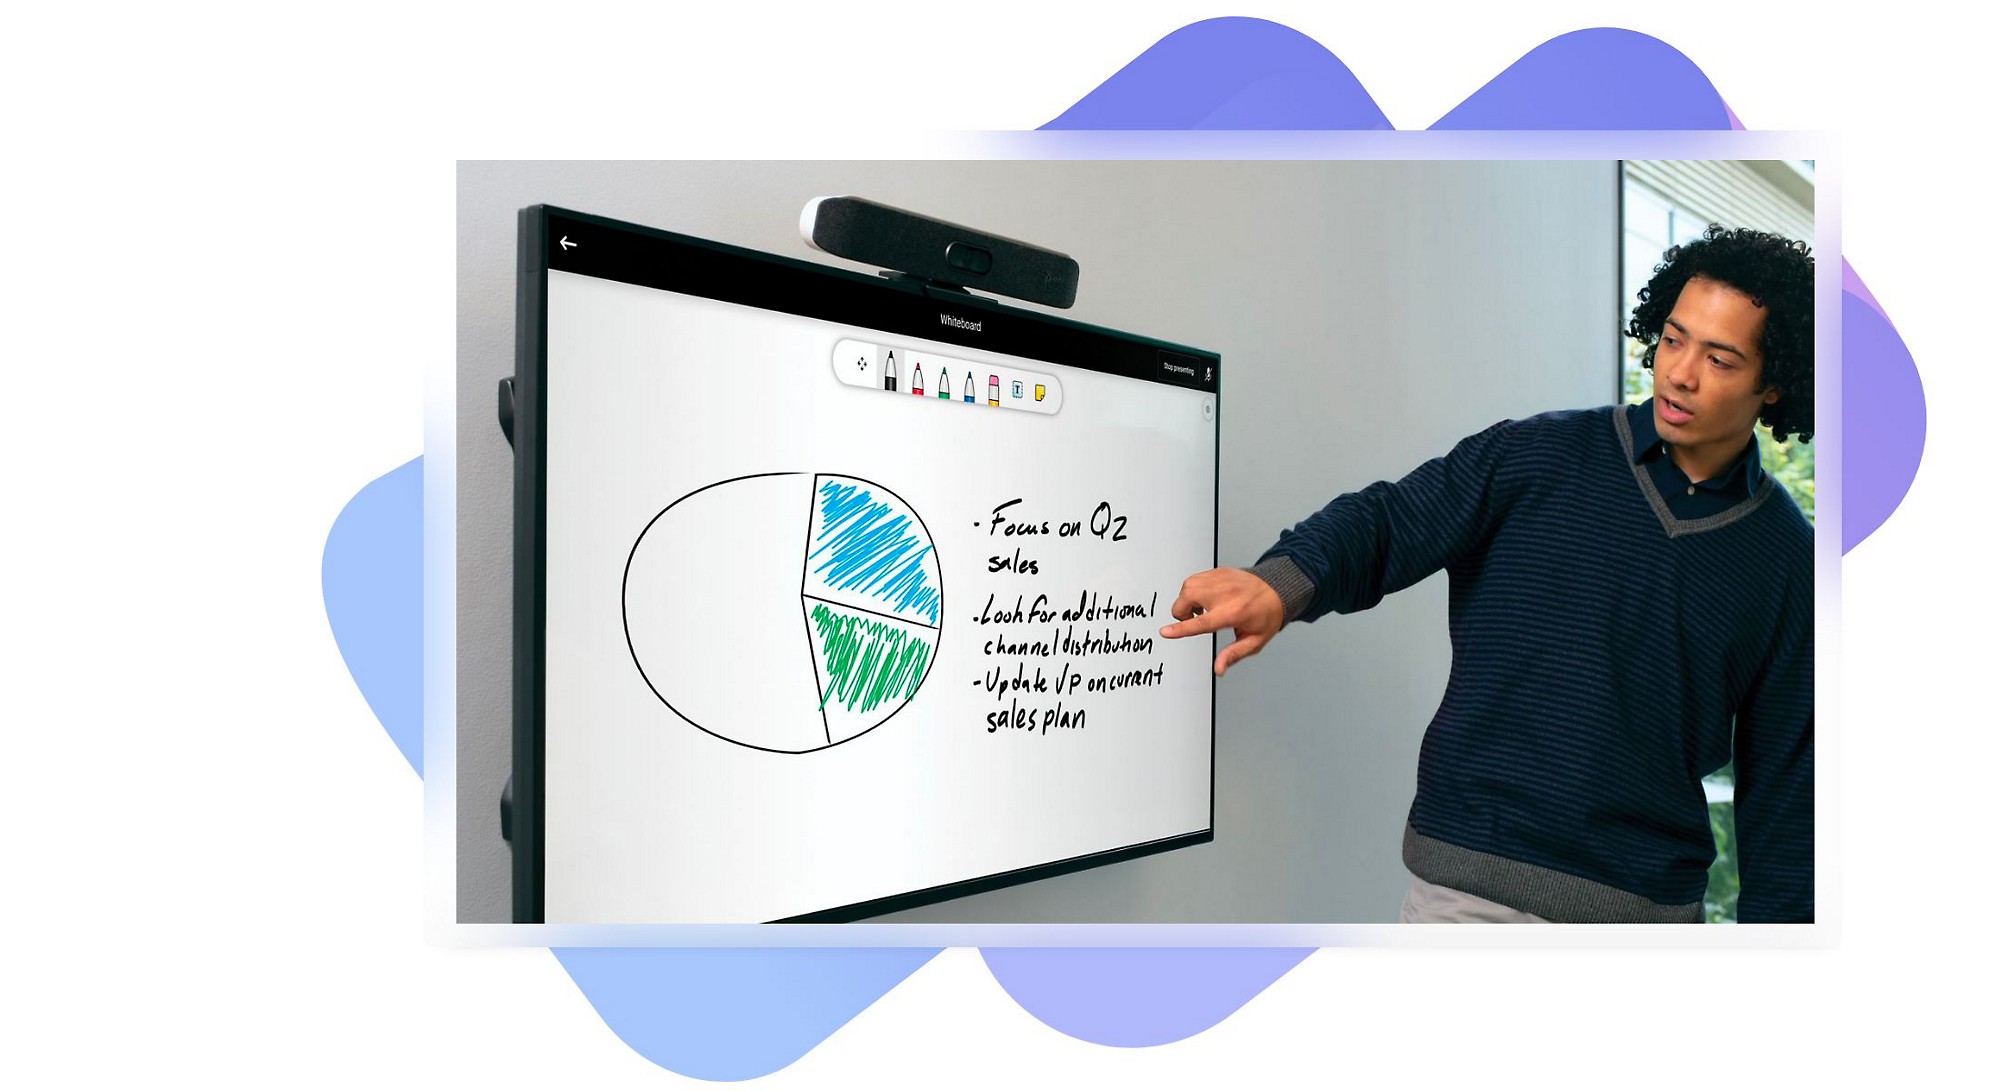 A person using Whiteboard to present meeting notes on a large touchscreen device.